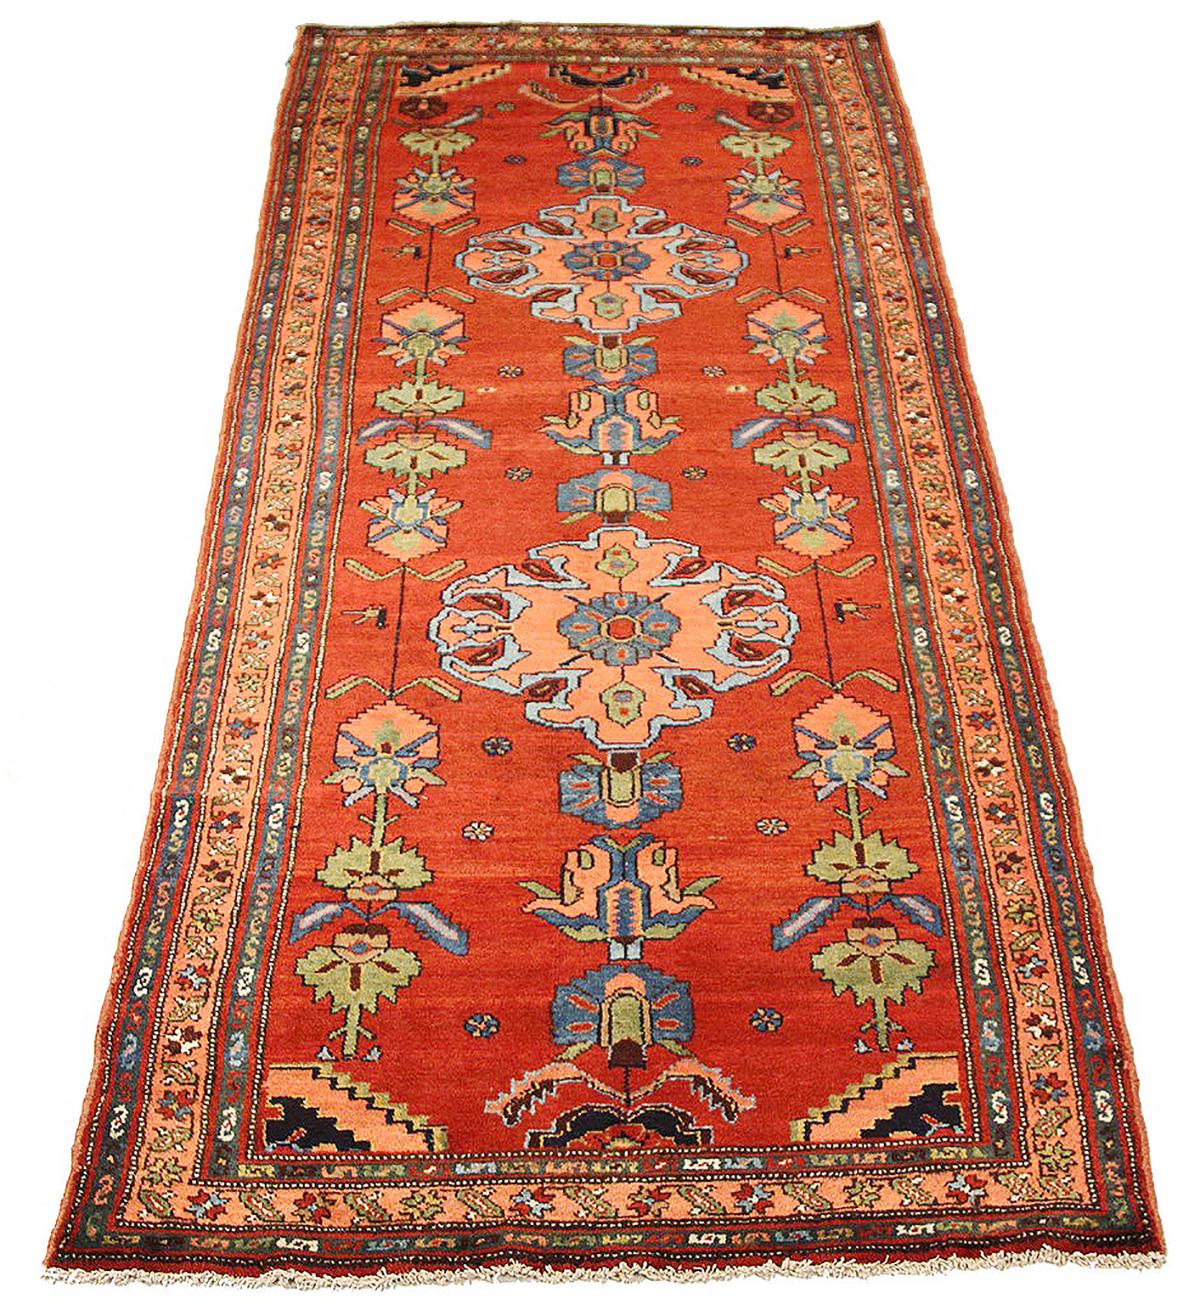 Antique Persian runner rug handwoven from the finest sheep’s wool and colored with all-natural vegetable dyes that are safe for humans and pets. It’s a traditional Malayer design featuring a mixed pink, blue, and green combination of floral details